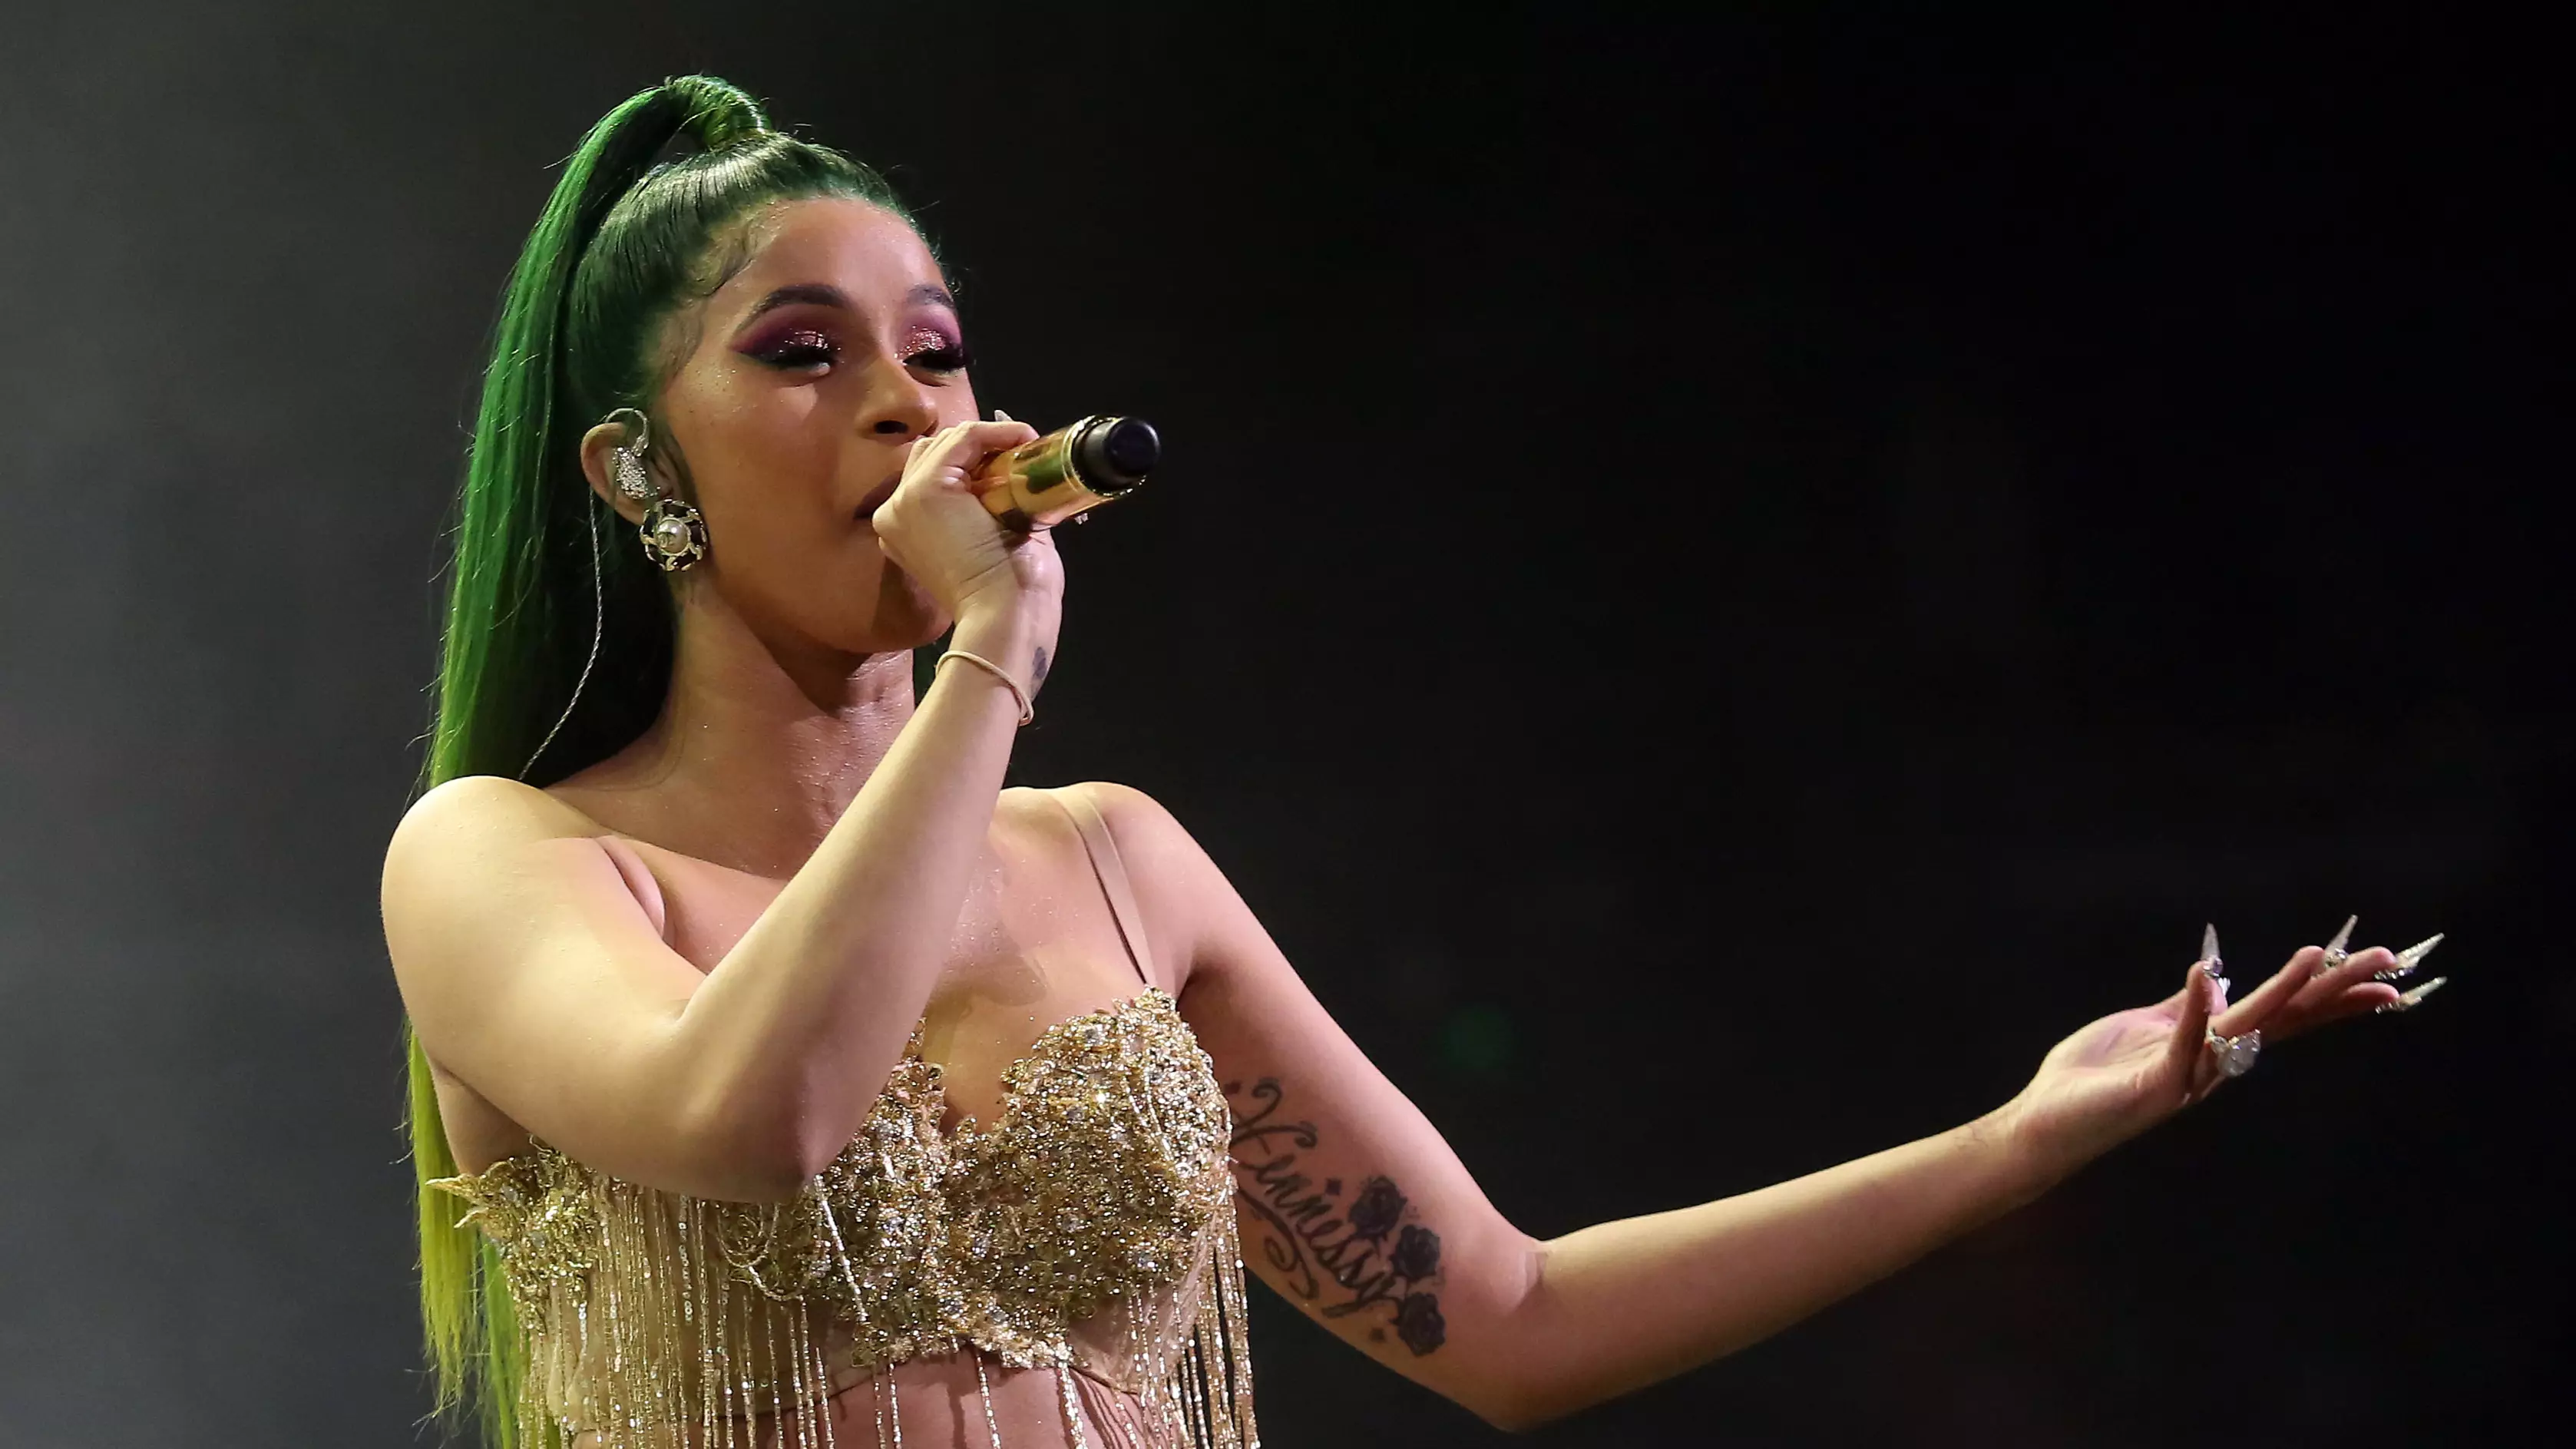 ​Cardi B In Court To Plead Not Guilty To Strip Club Assault: "I Ain't Going To Jail."